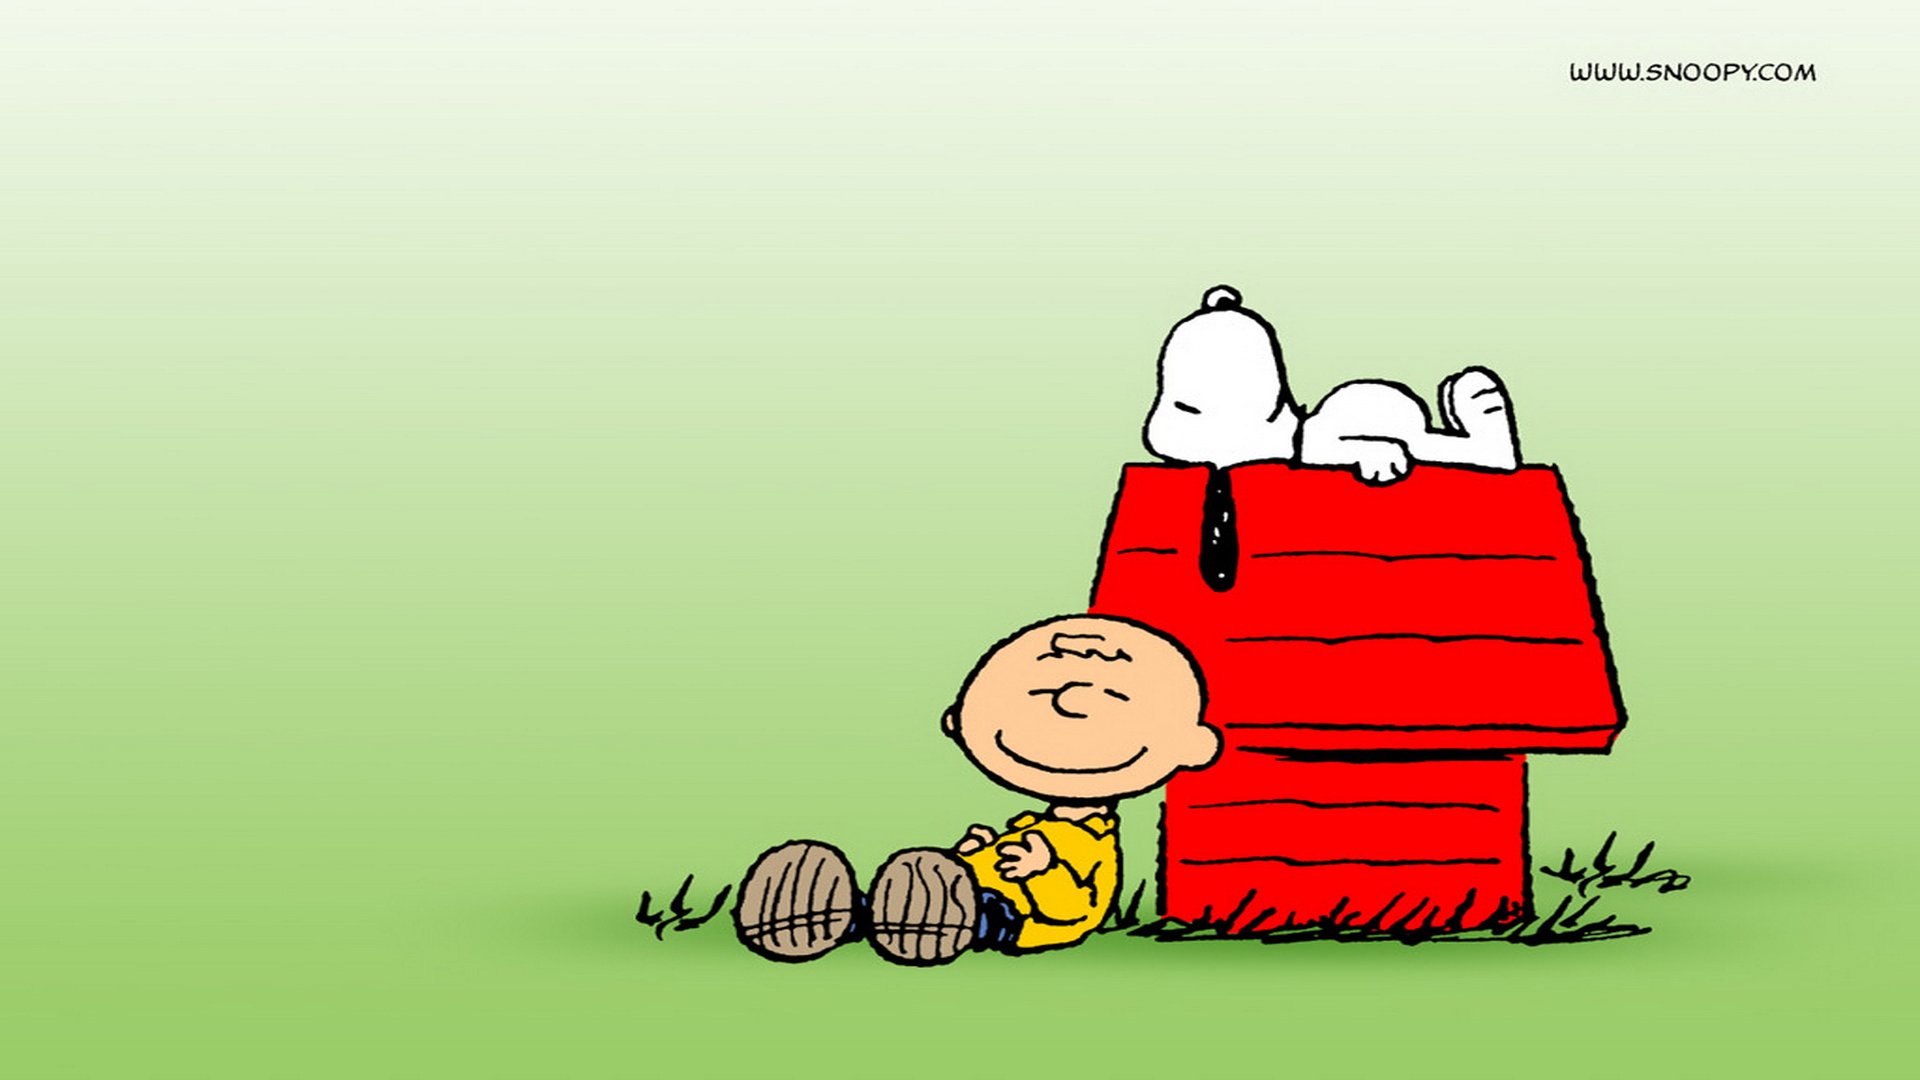 Snoopy Wallpapers 10 HD Wallpapers HD Background Wallpaper 1920x1080